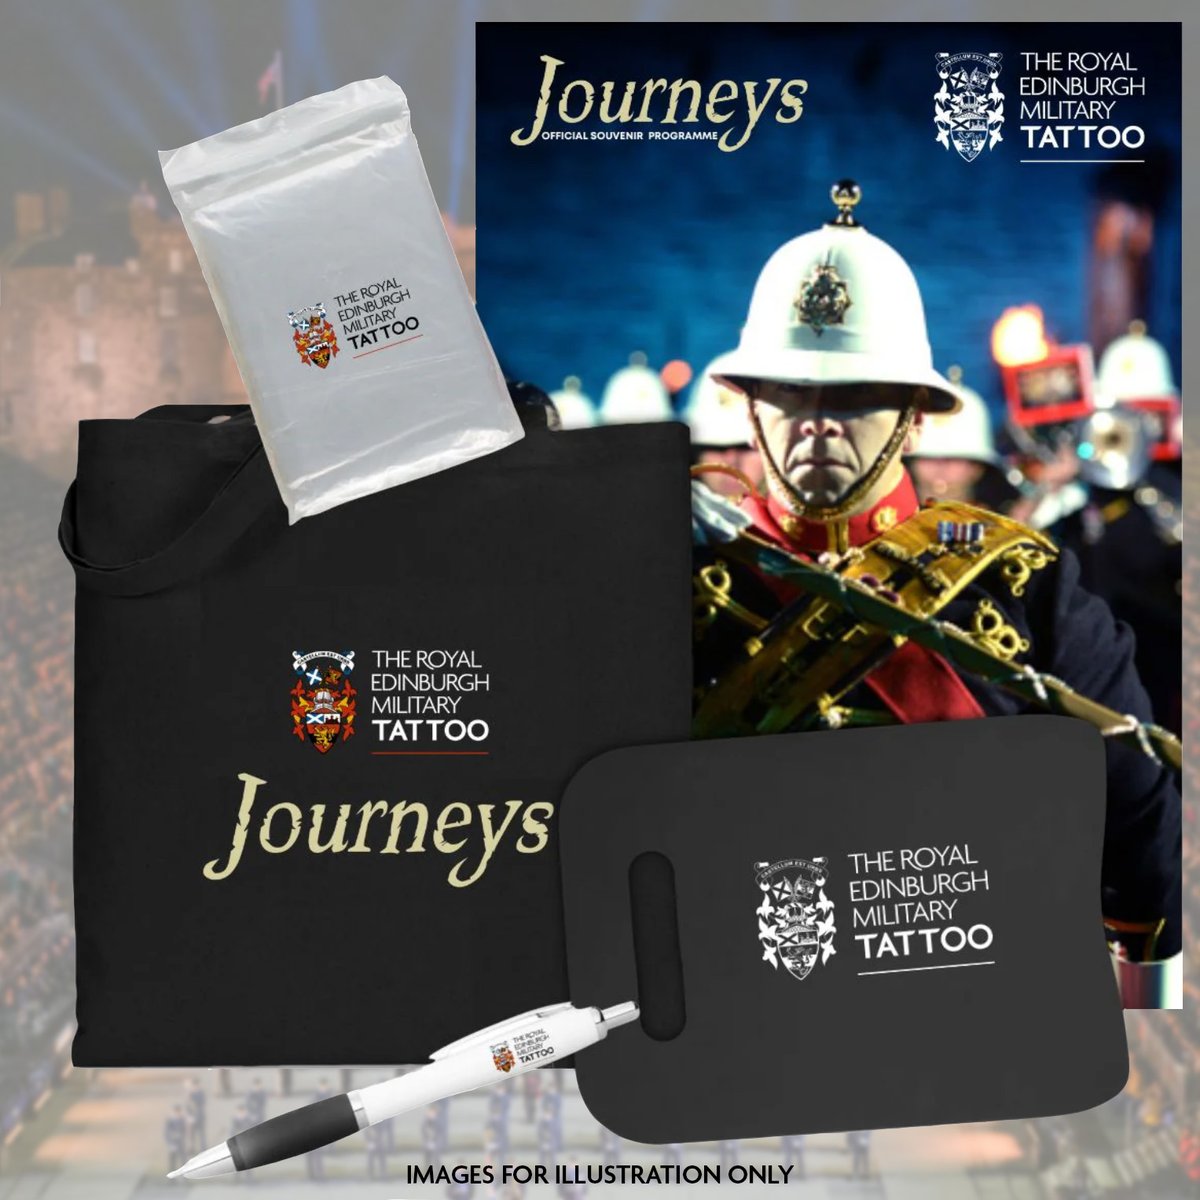 Ensure that you have everything you need for your 2024 Tattoo experience with our new Journeys Essential Collection! Save yourself £8 by pre-ordering today. *For collection at our Journeys Show only.* bit.ly/4aVcJfv #EdinTattoo #Journeys